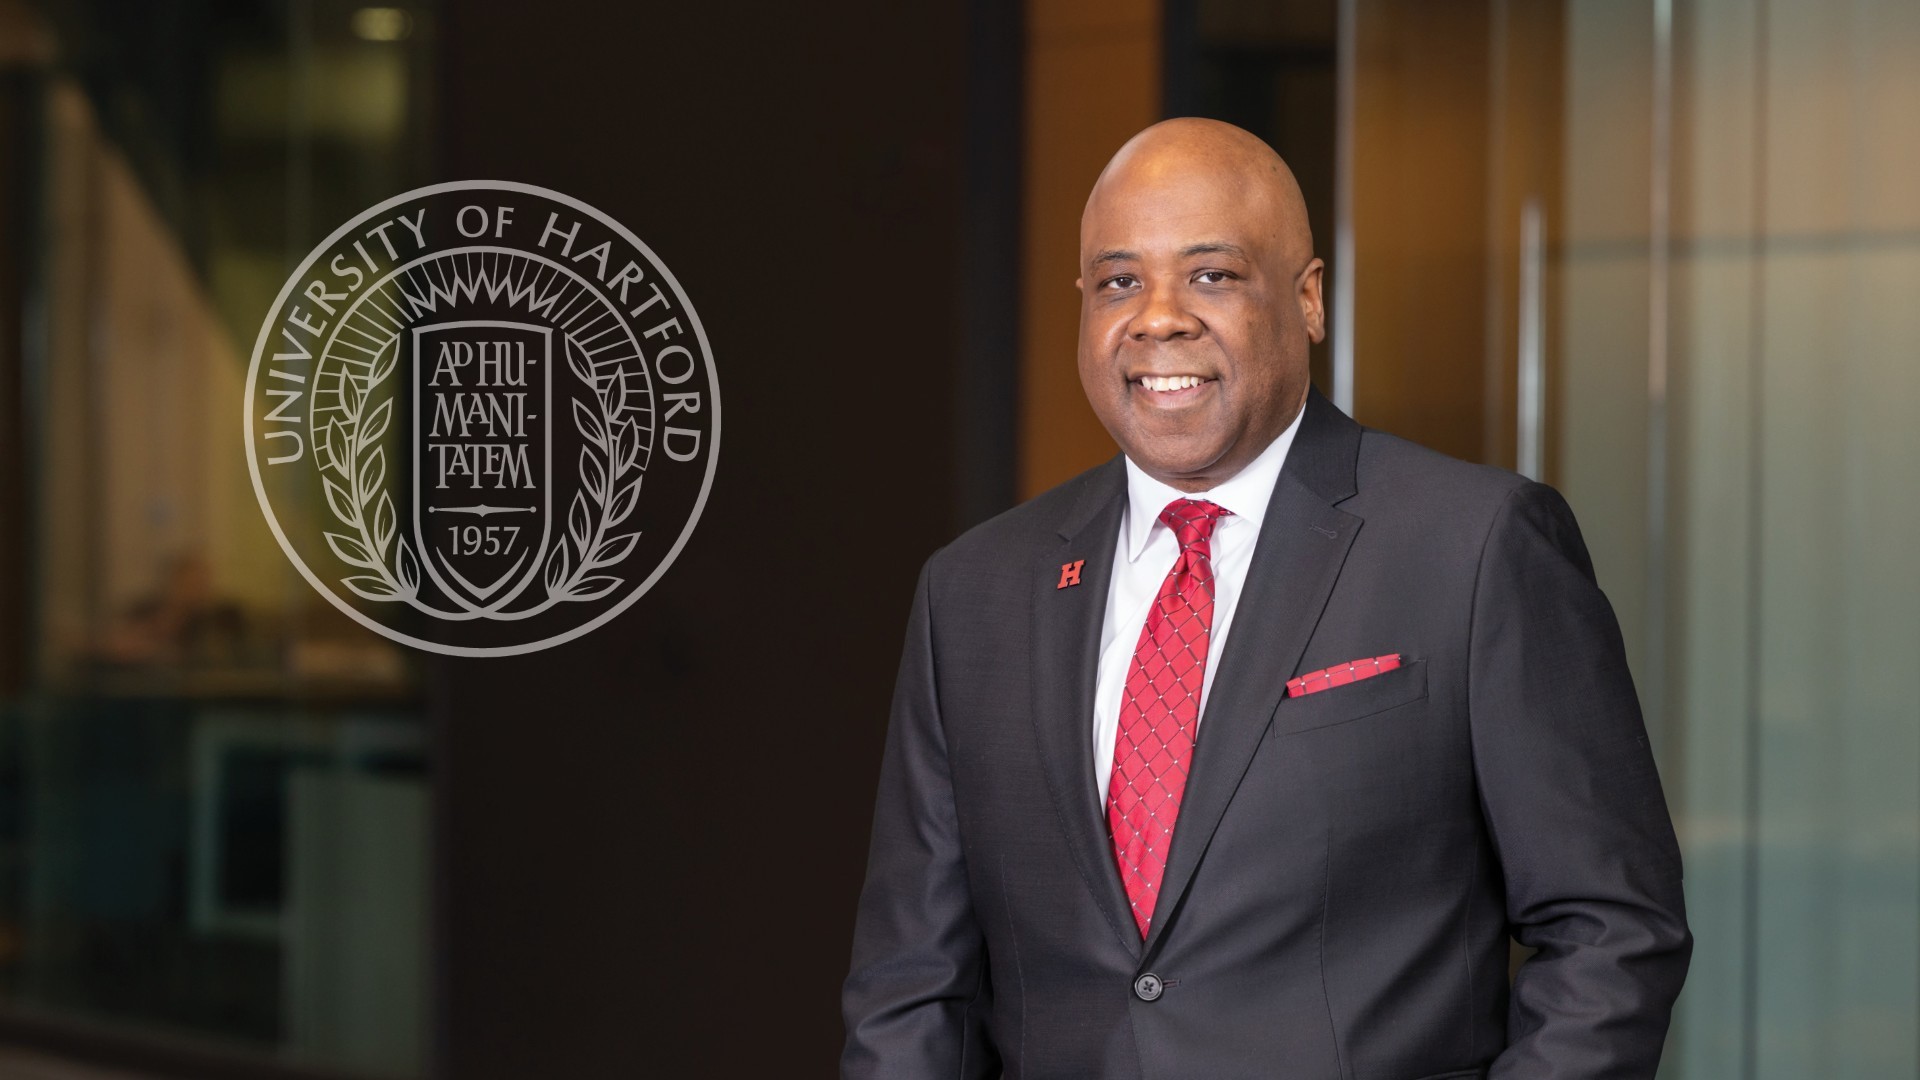 Ward currently serves as the vice president of learner success and dean of campus life at Babson College in Wellesley, Mass.